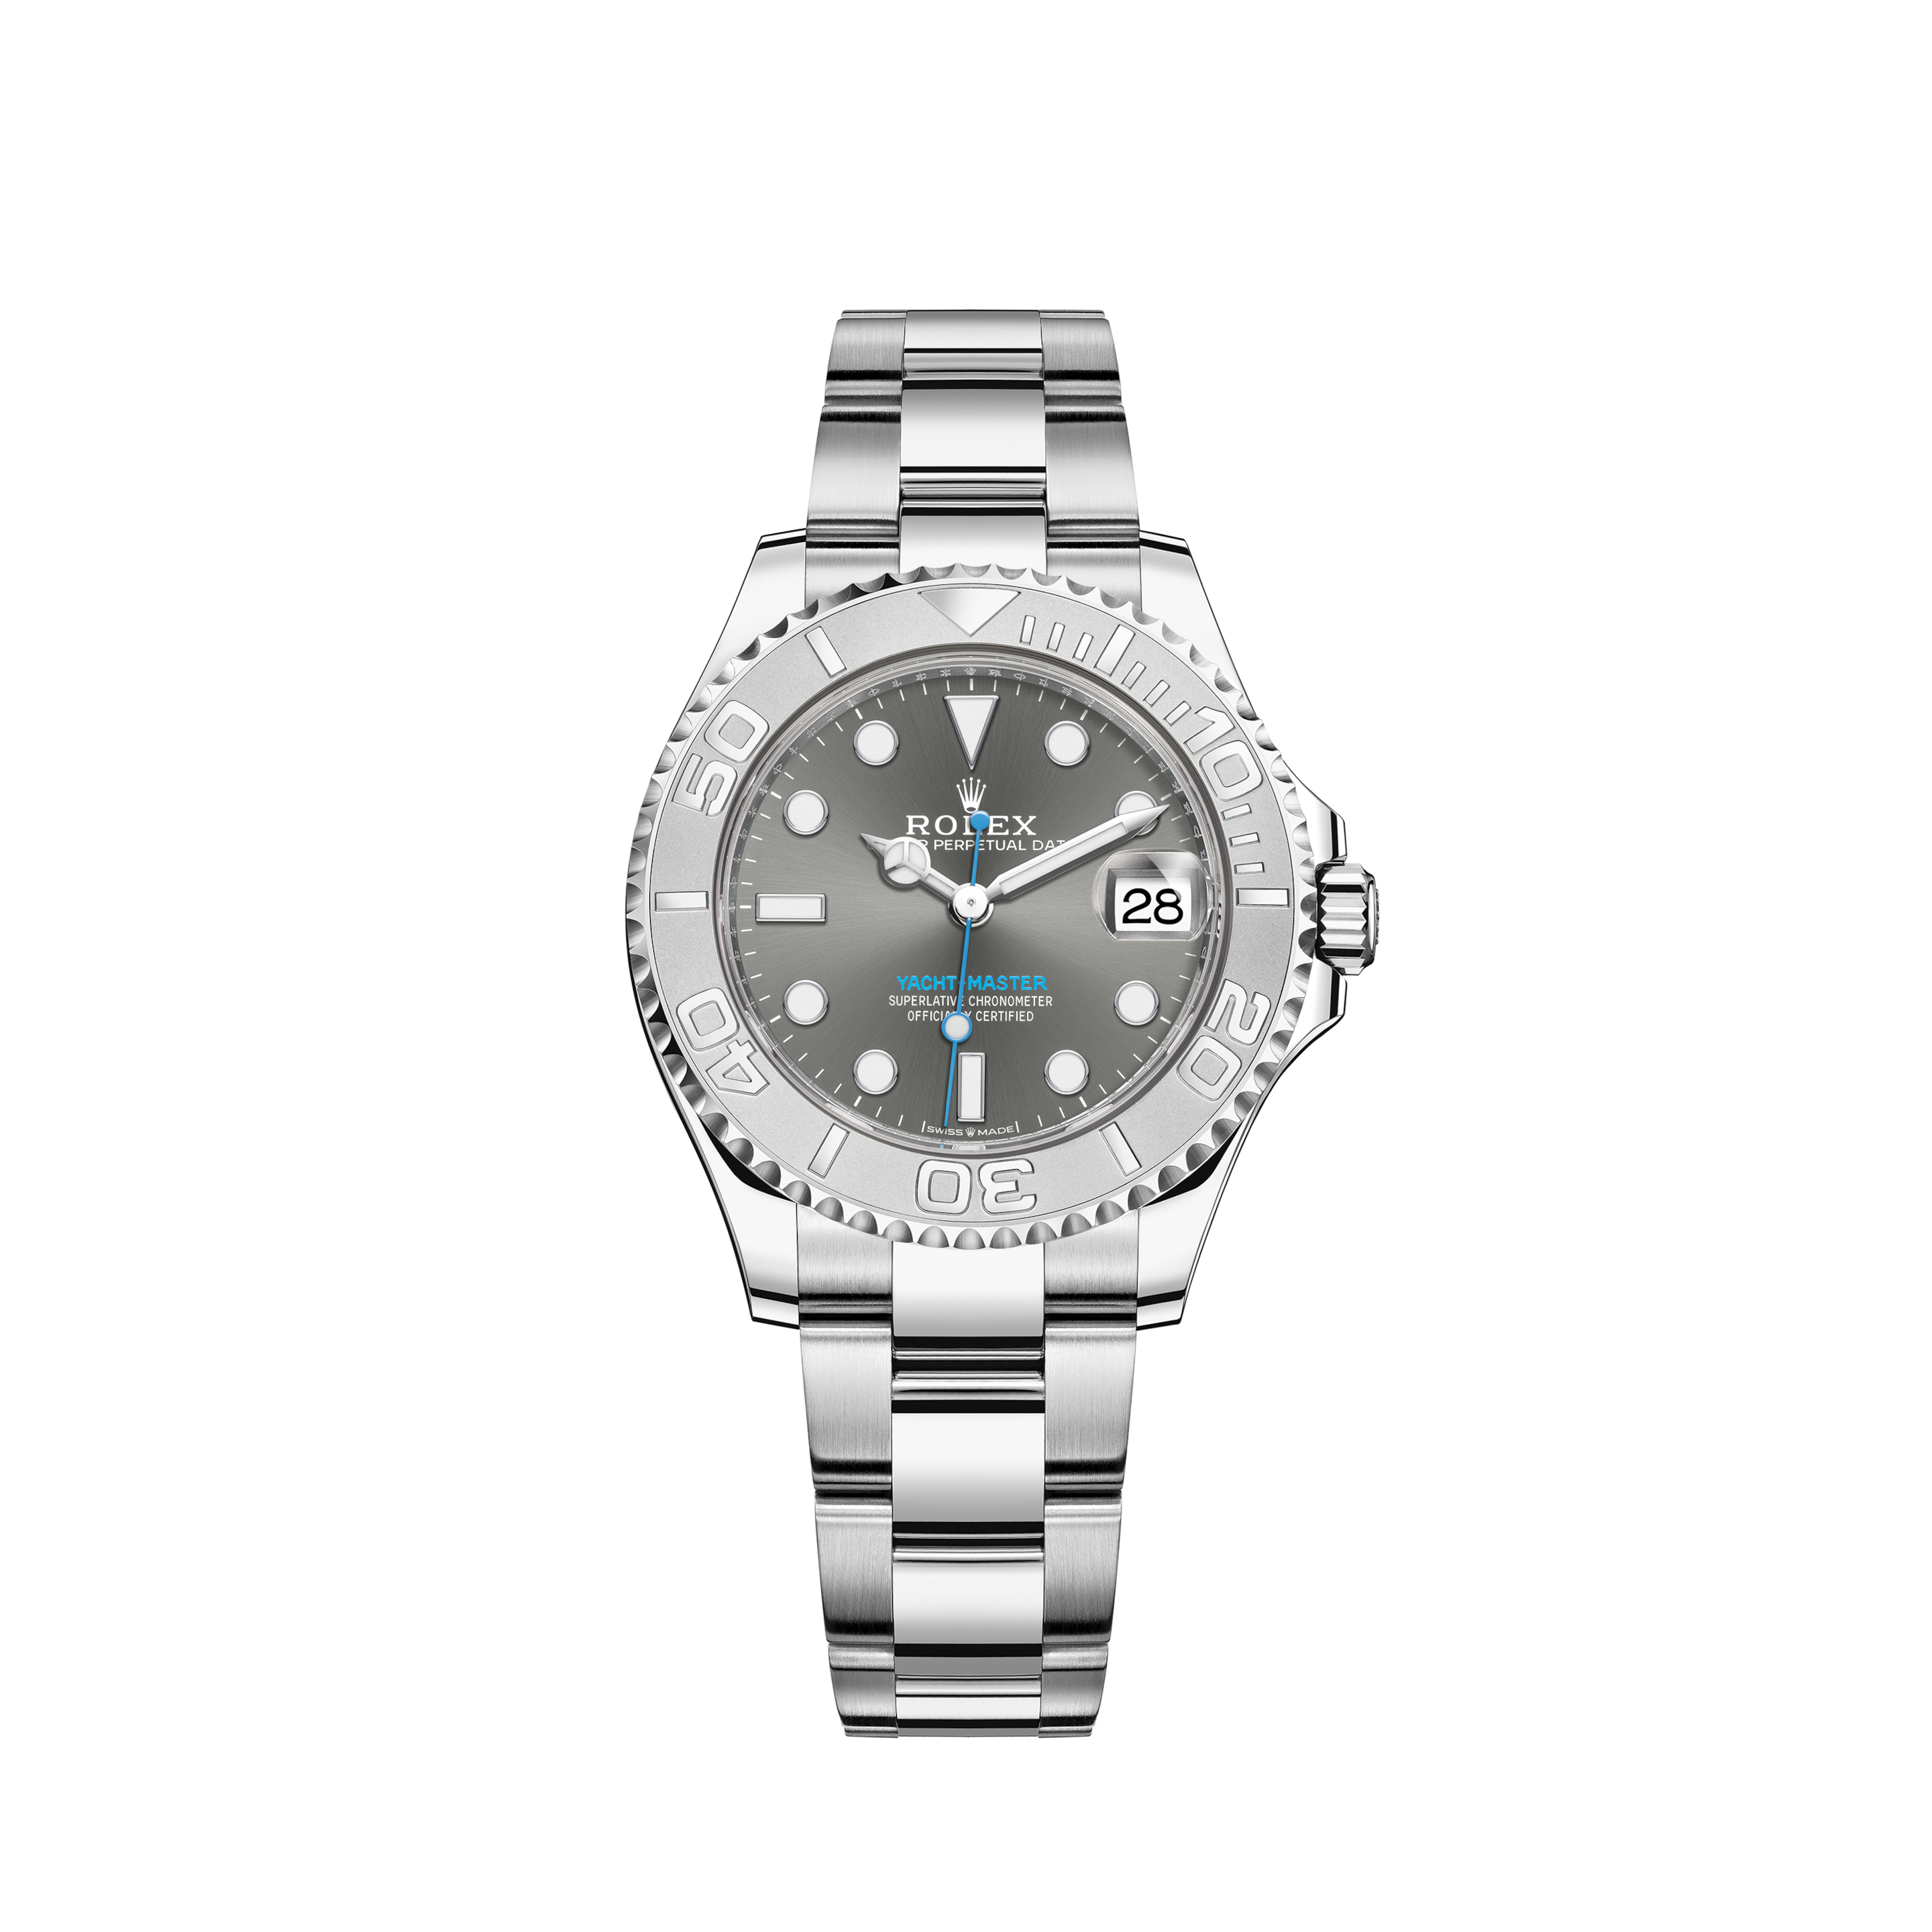 Rolex Datejust Oyster Perpetual 41mm Black Dial JubileeRolex Datejust Oyster Perpetual 41mm Black Dial MY